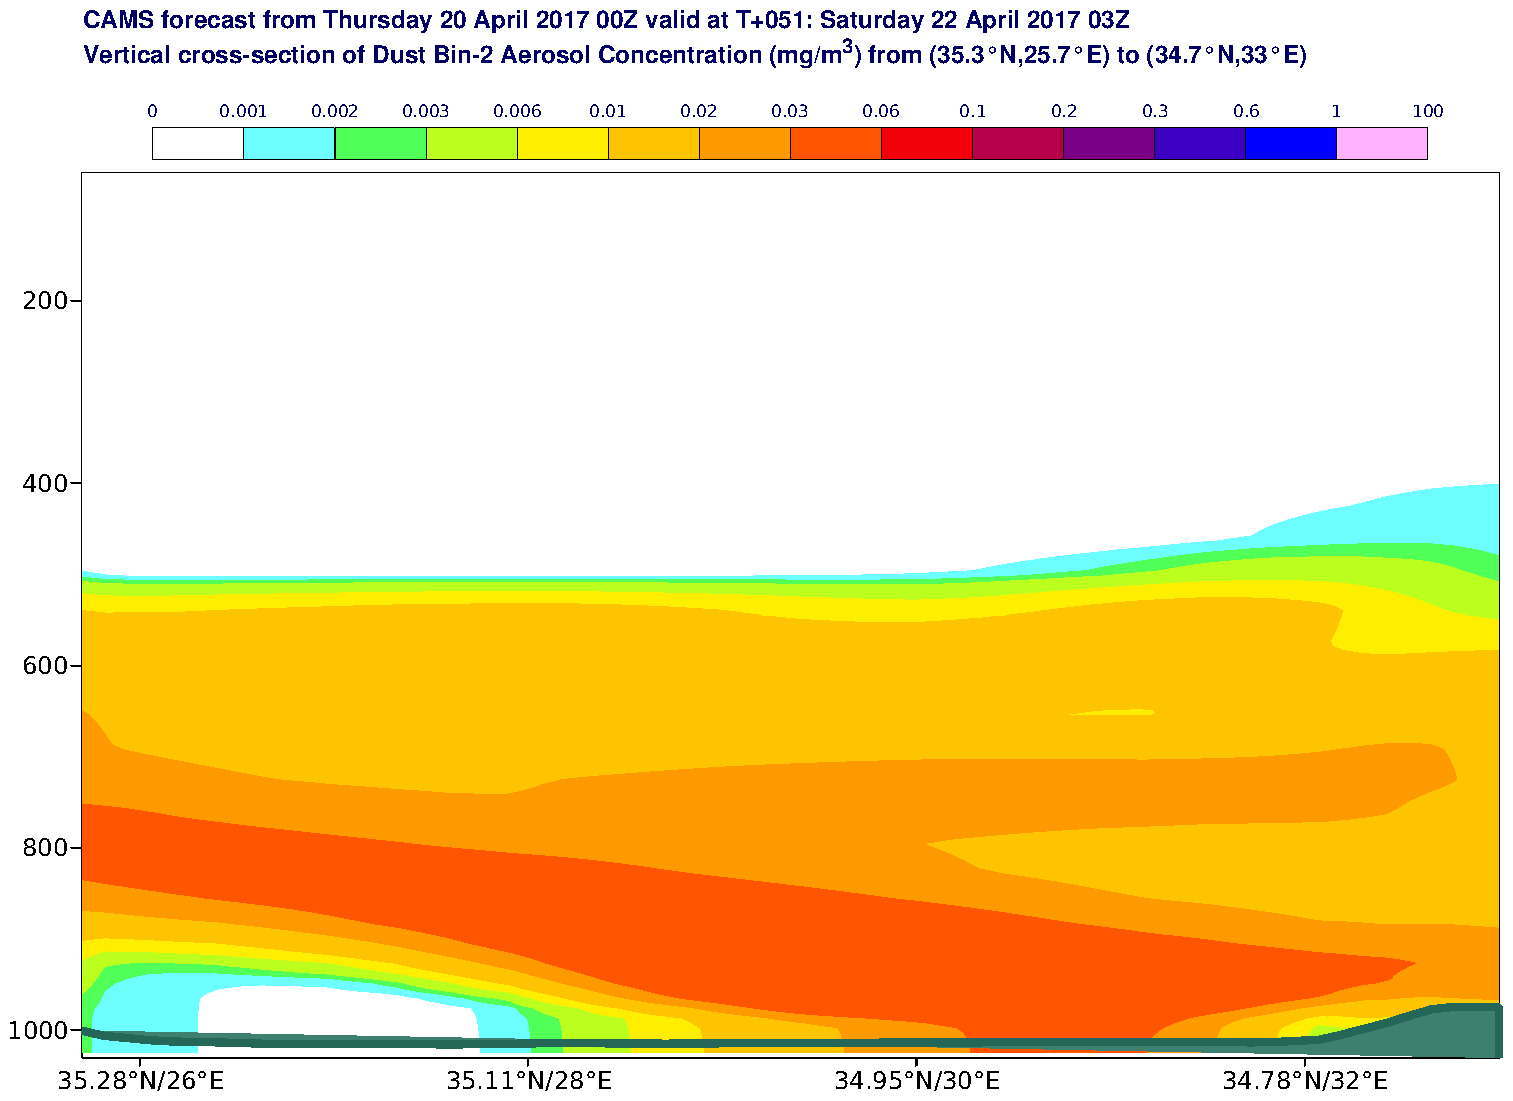 Vertical cross-section of Dust Bin-2 Aerosol Concentration (mg/m3) valid at T51 - 2017-04-22 03:00